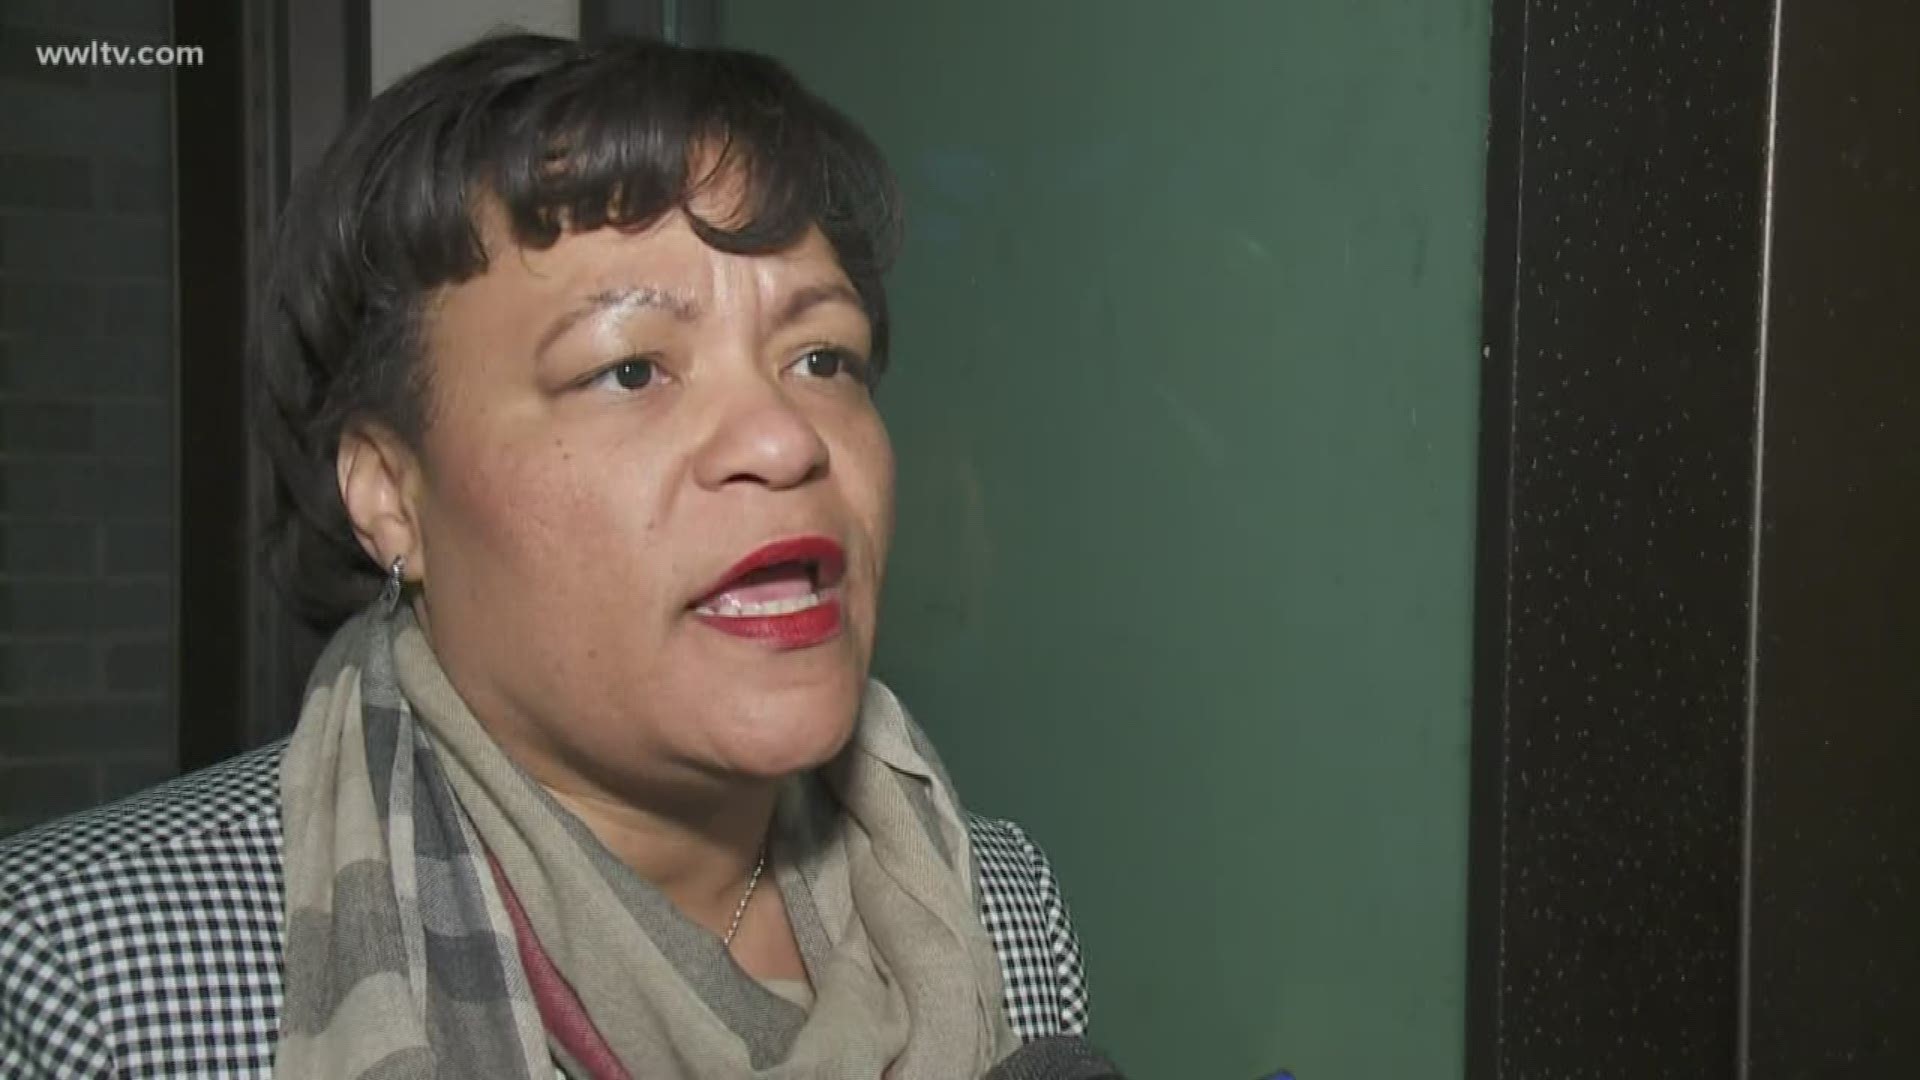 “One of the hardest phone calls that I’ve had to make is calling the parents, as well as understanding she has a 19 year old daughter," Mayor LaToya Cantrell said.